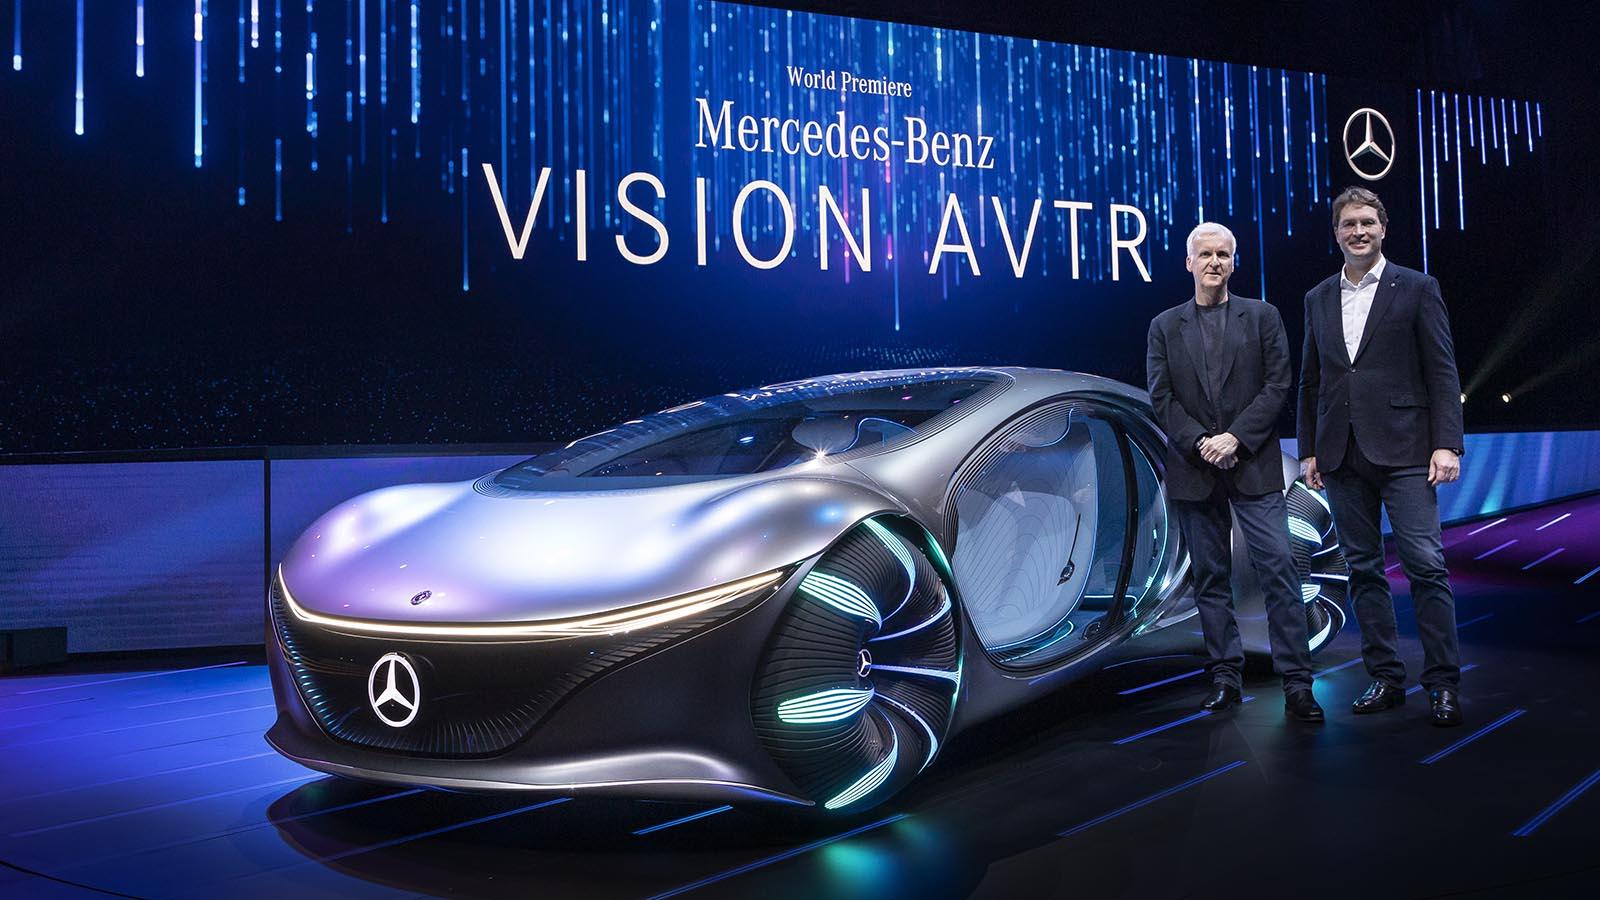 With Director James Cameron's Help, Mercedes Reveals its New